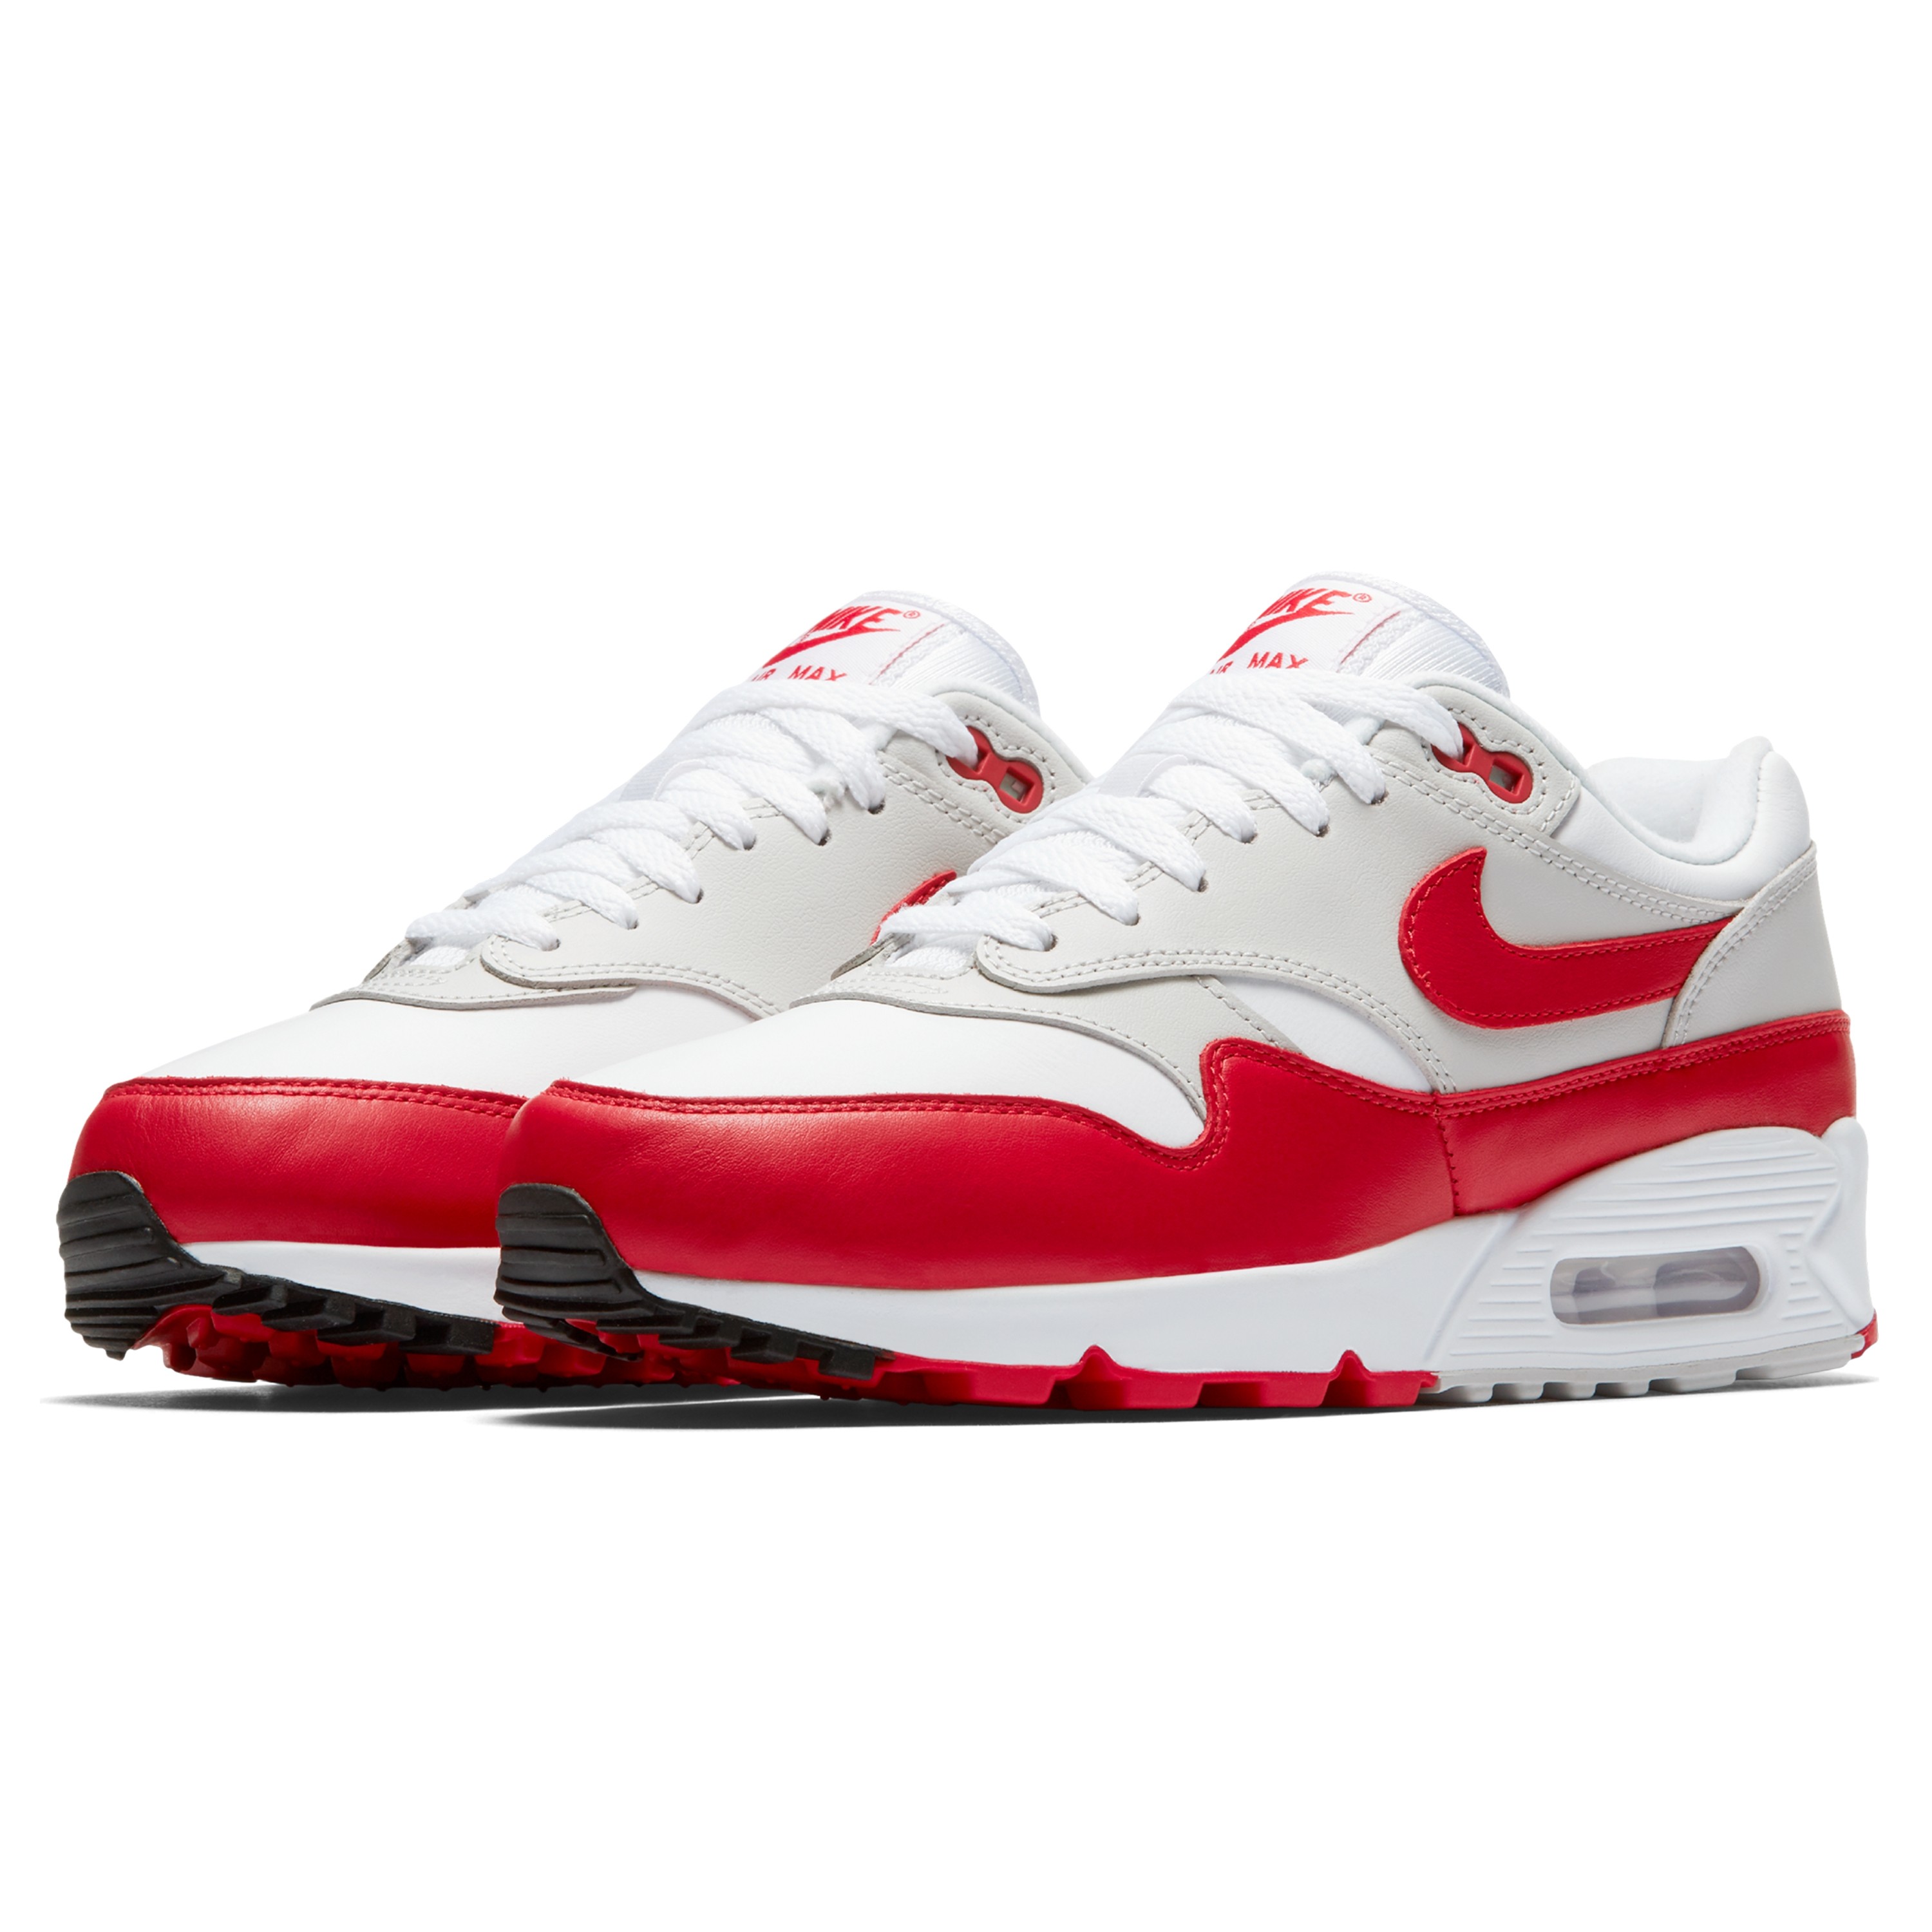 Nike Air Max 90/1 WMNS 'University Red' (White/University Red-Neutral ...